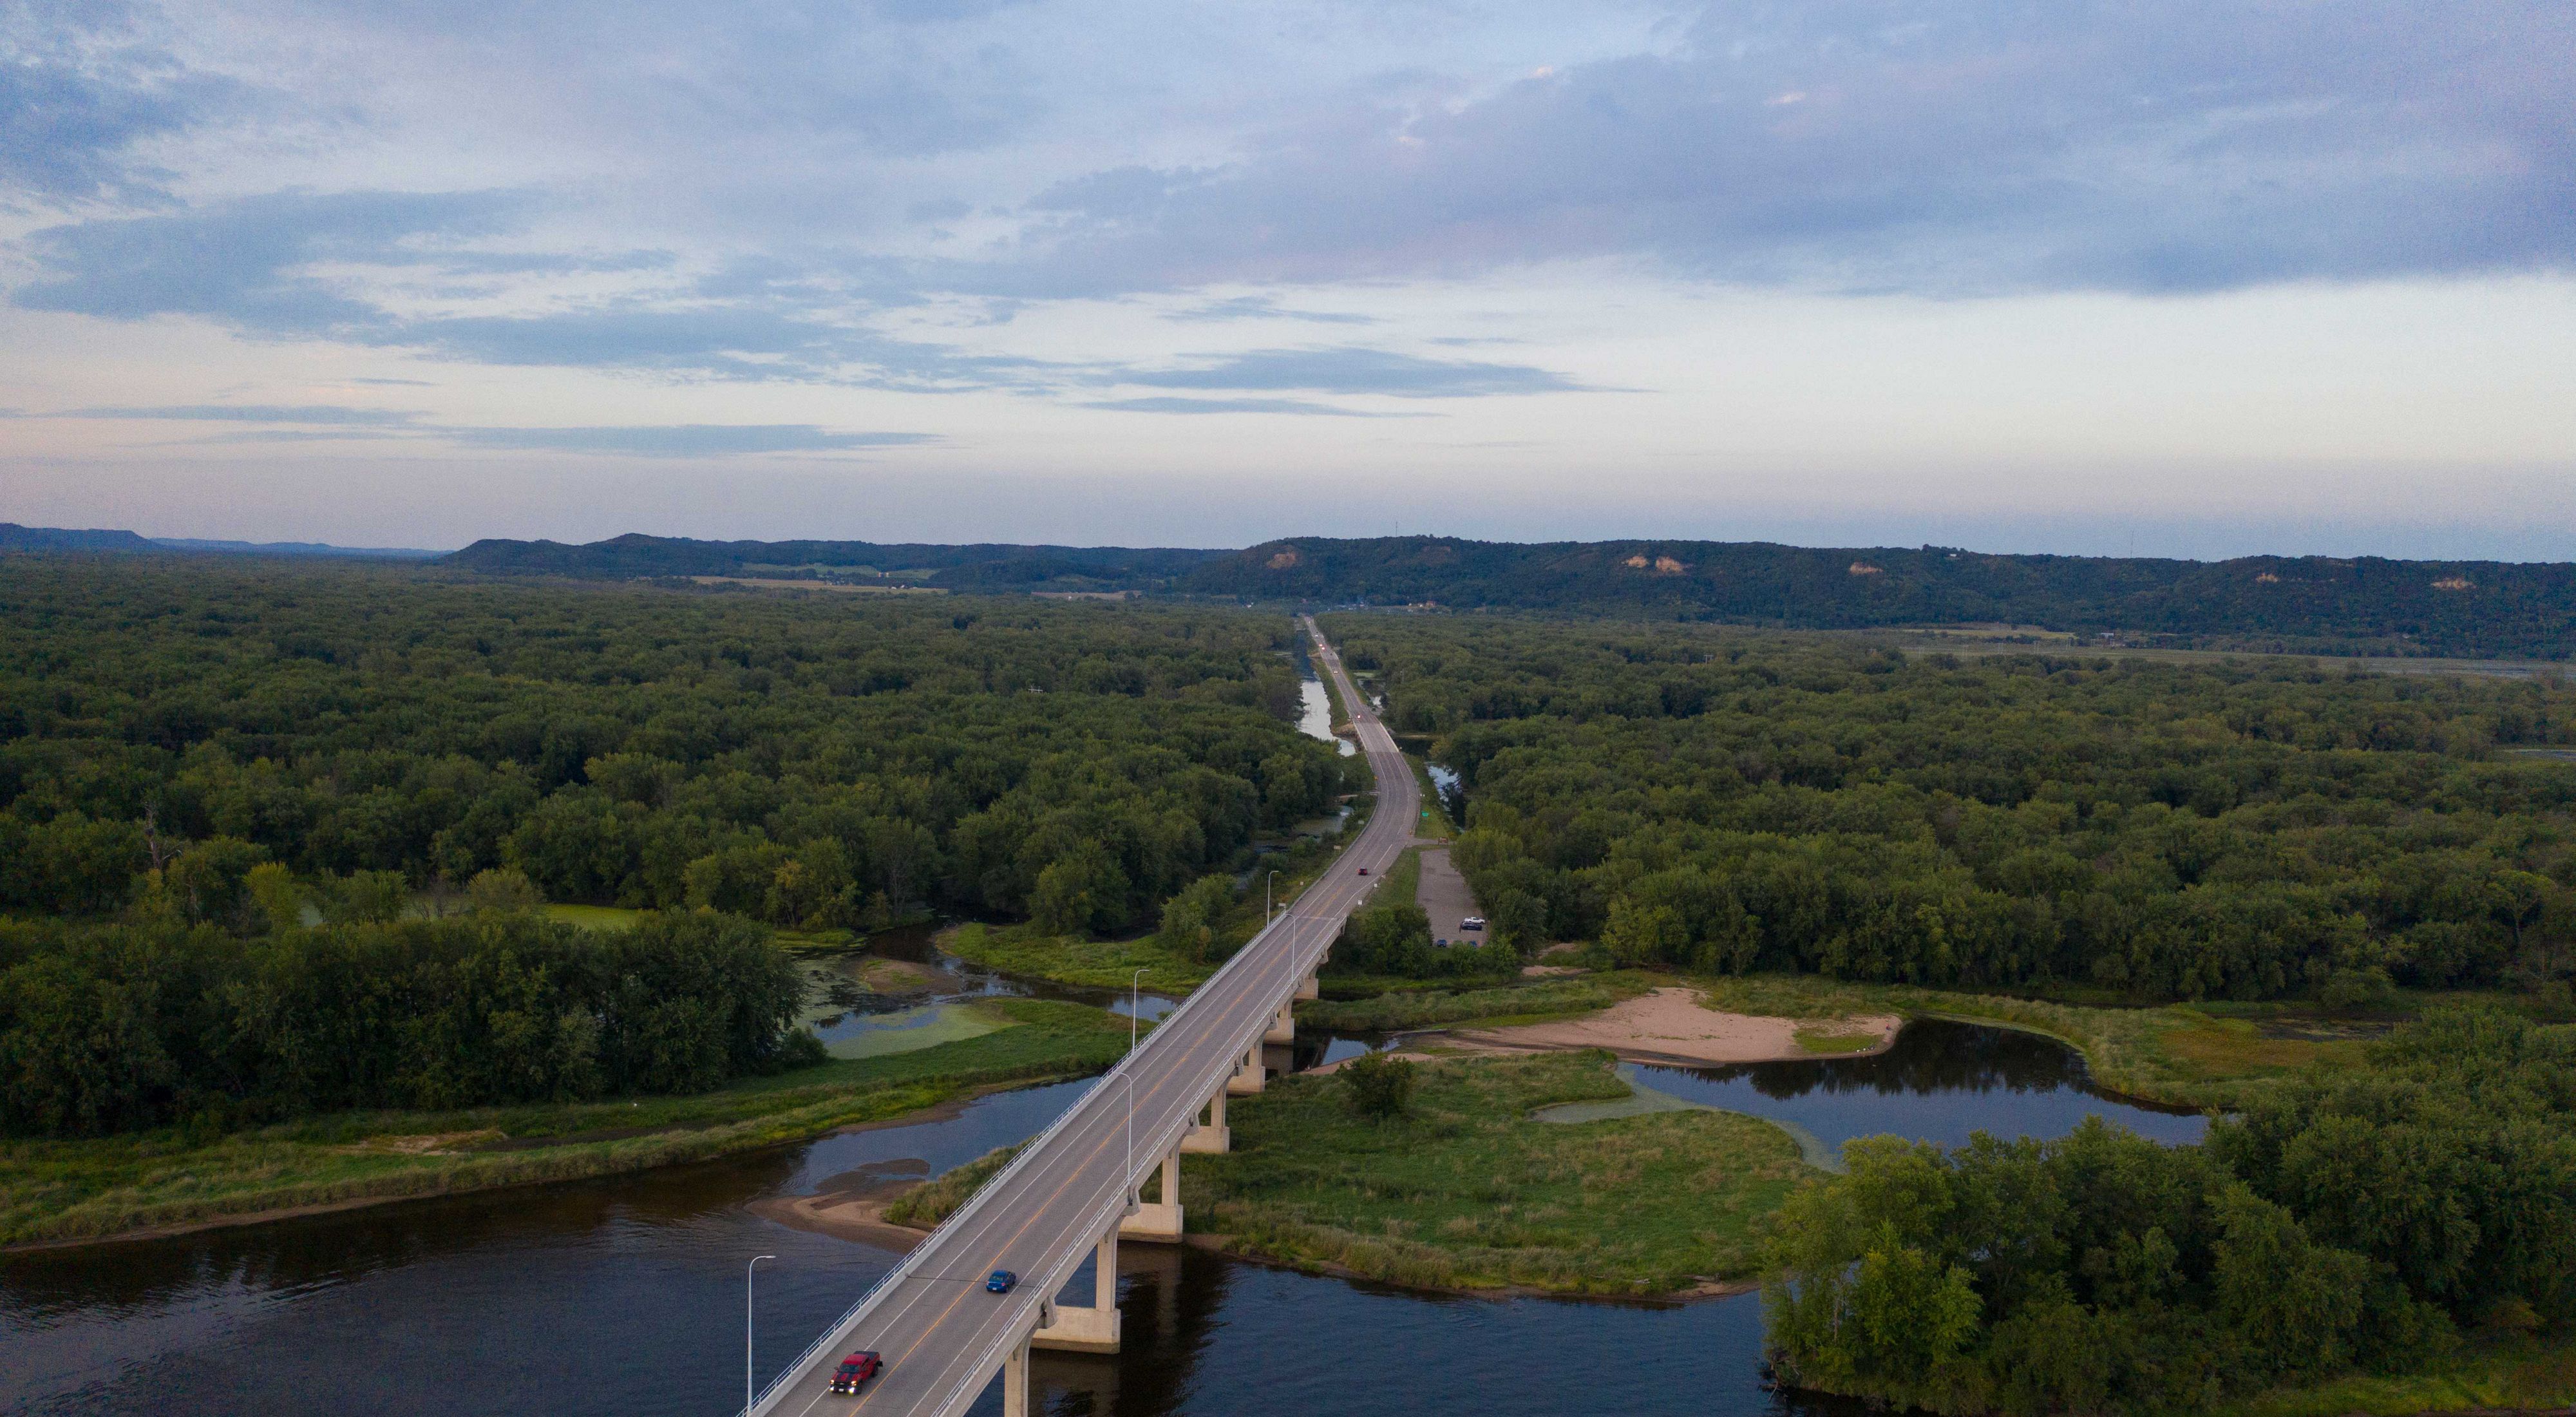 Aerial view of a bridge over the Mississippi River near Wabasha, Minnesota, and a road that extends through thick green forests toward green hills in the distance.